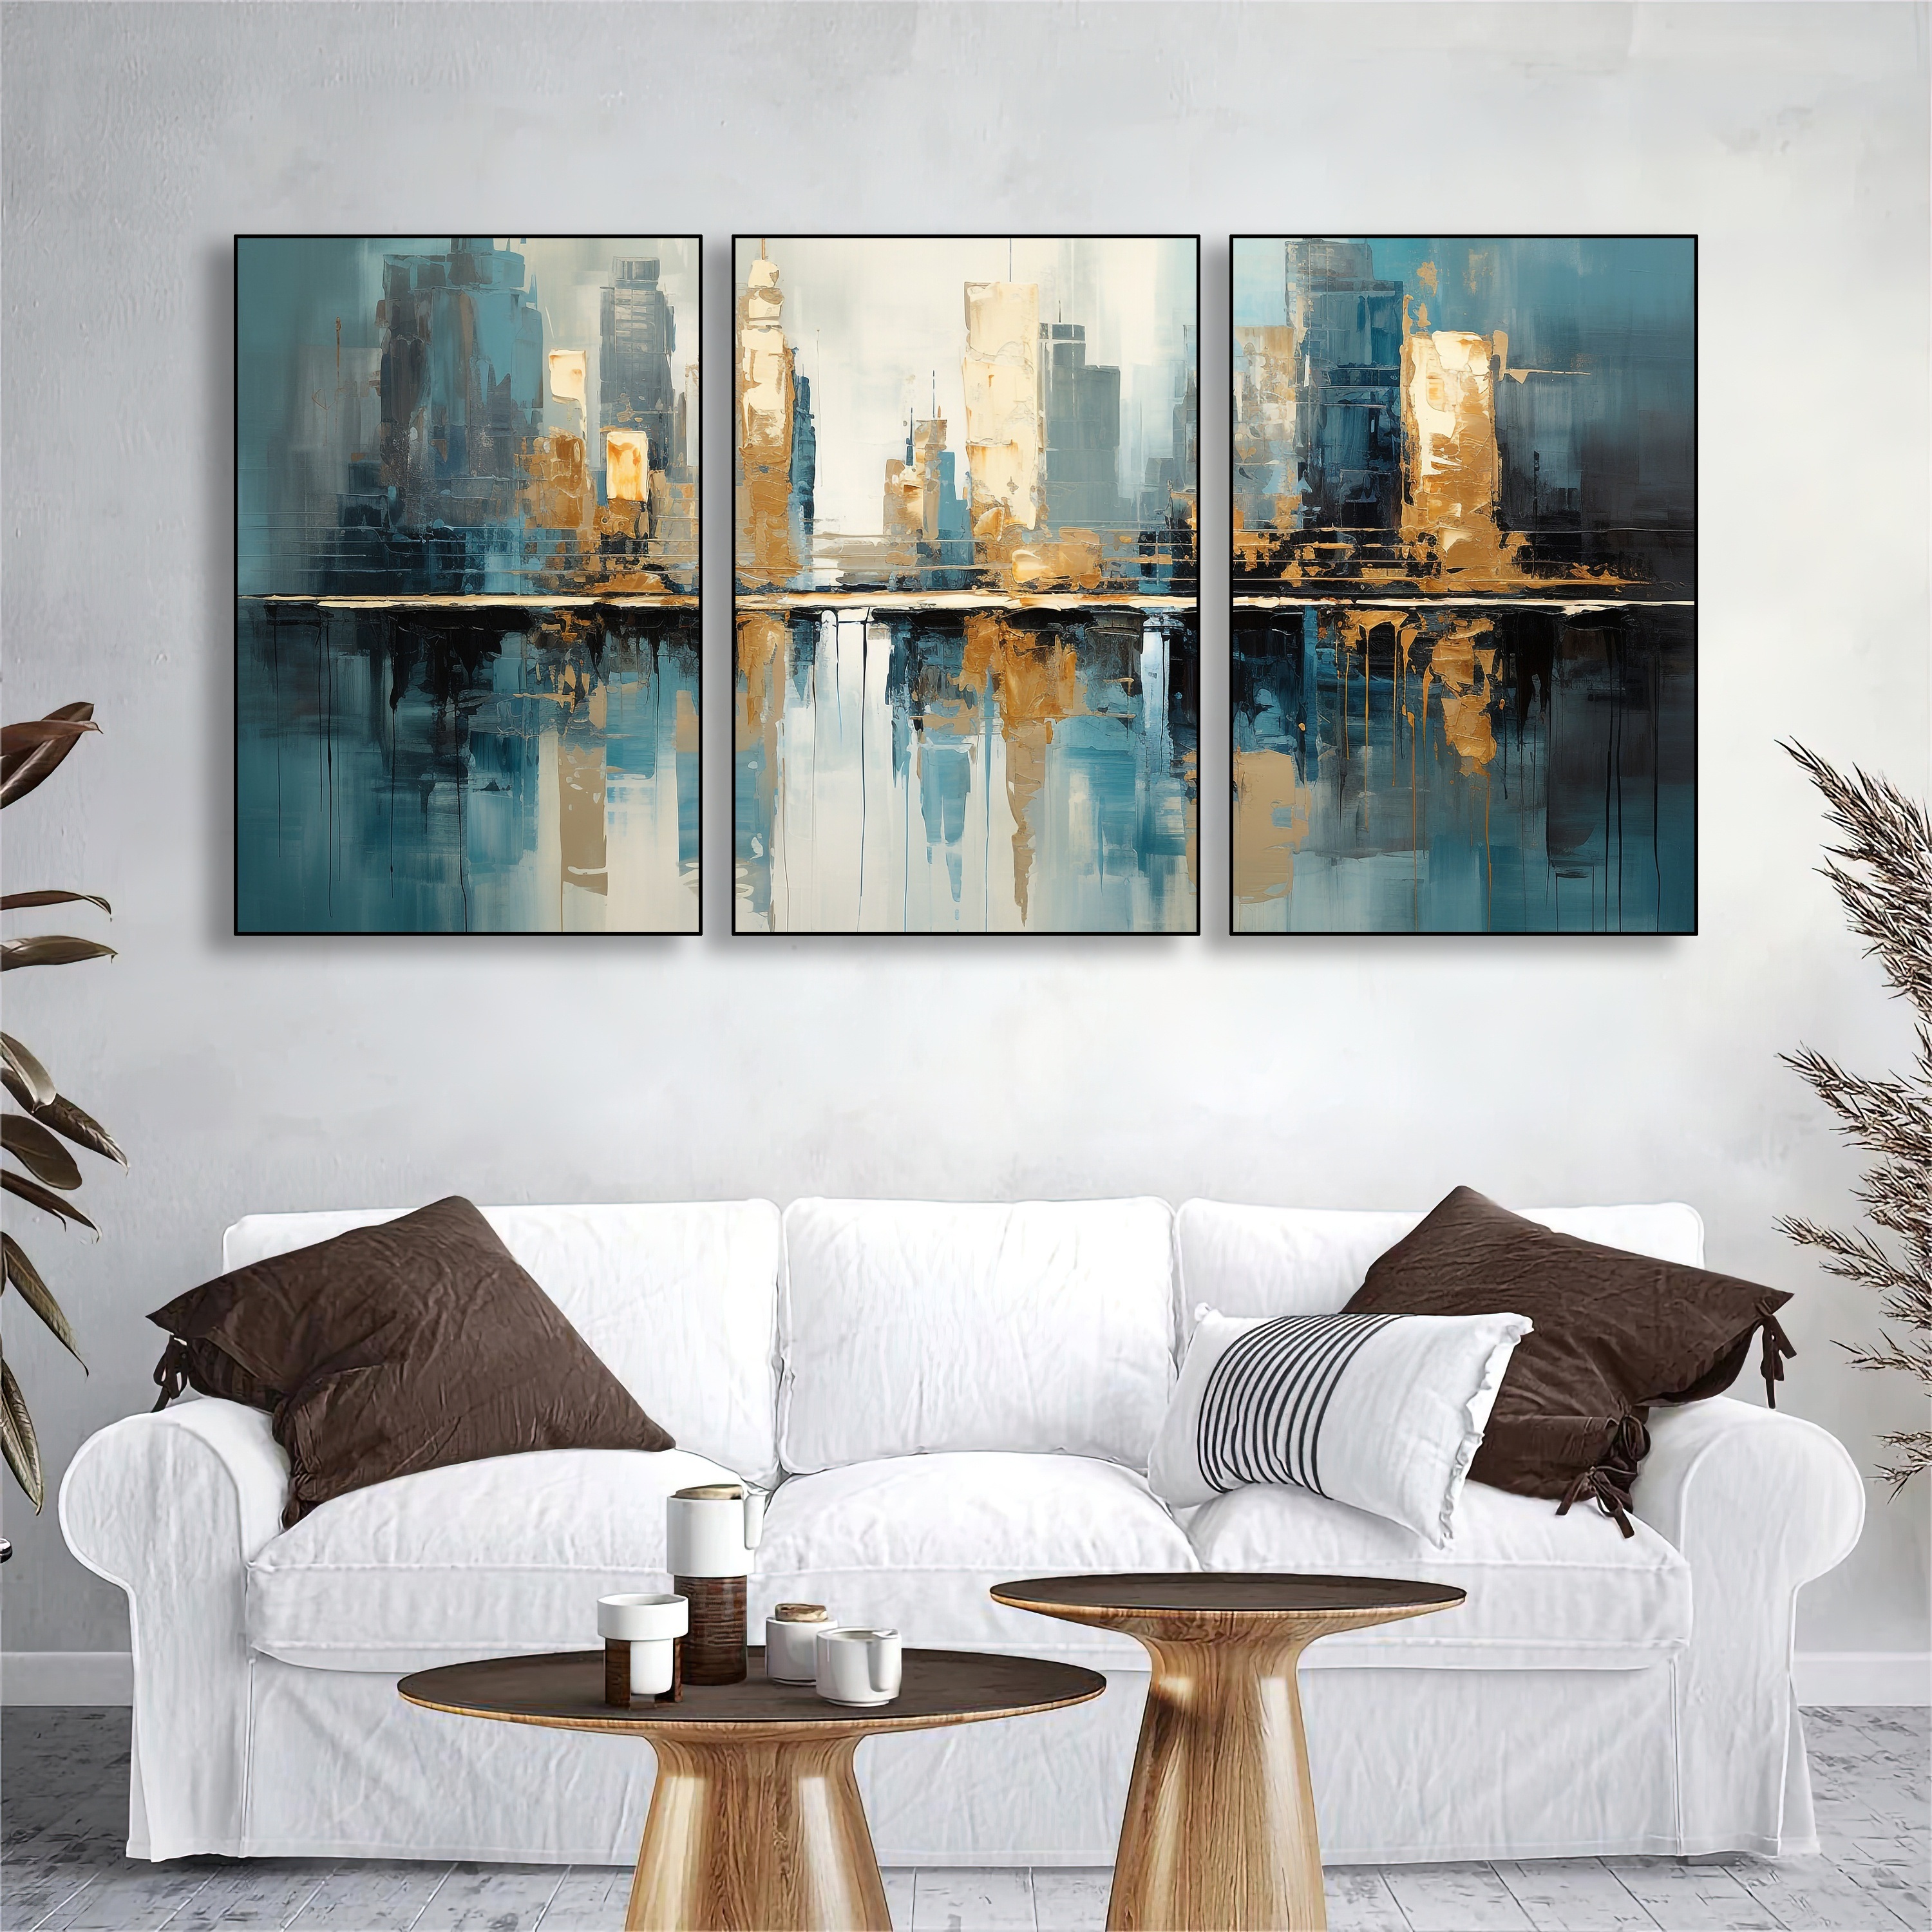 5pcs/set Las Vegas Skyline Wall Art for Living Room Cityscape Canvas Modern  Home Decor Panorama Pictures City Building Artwork Night View 